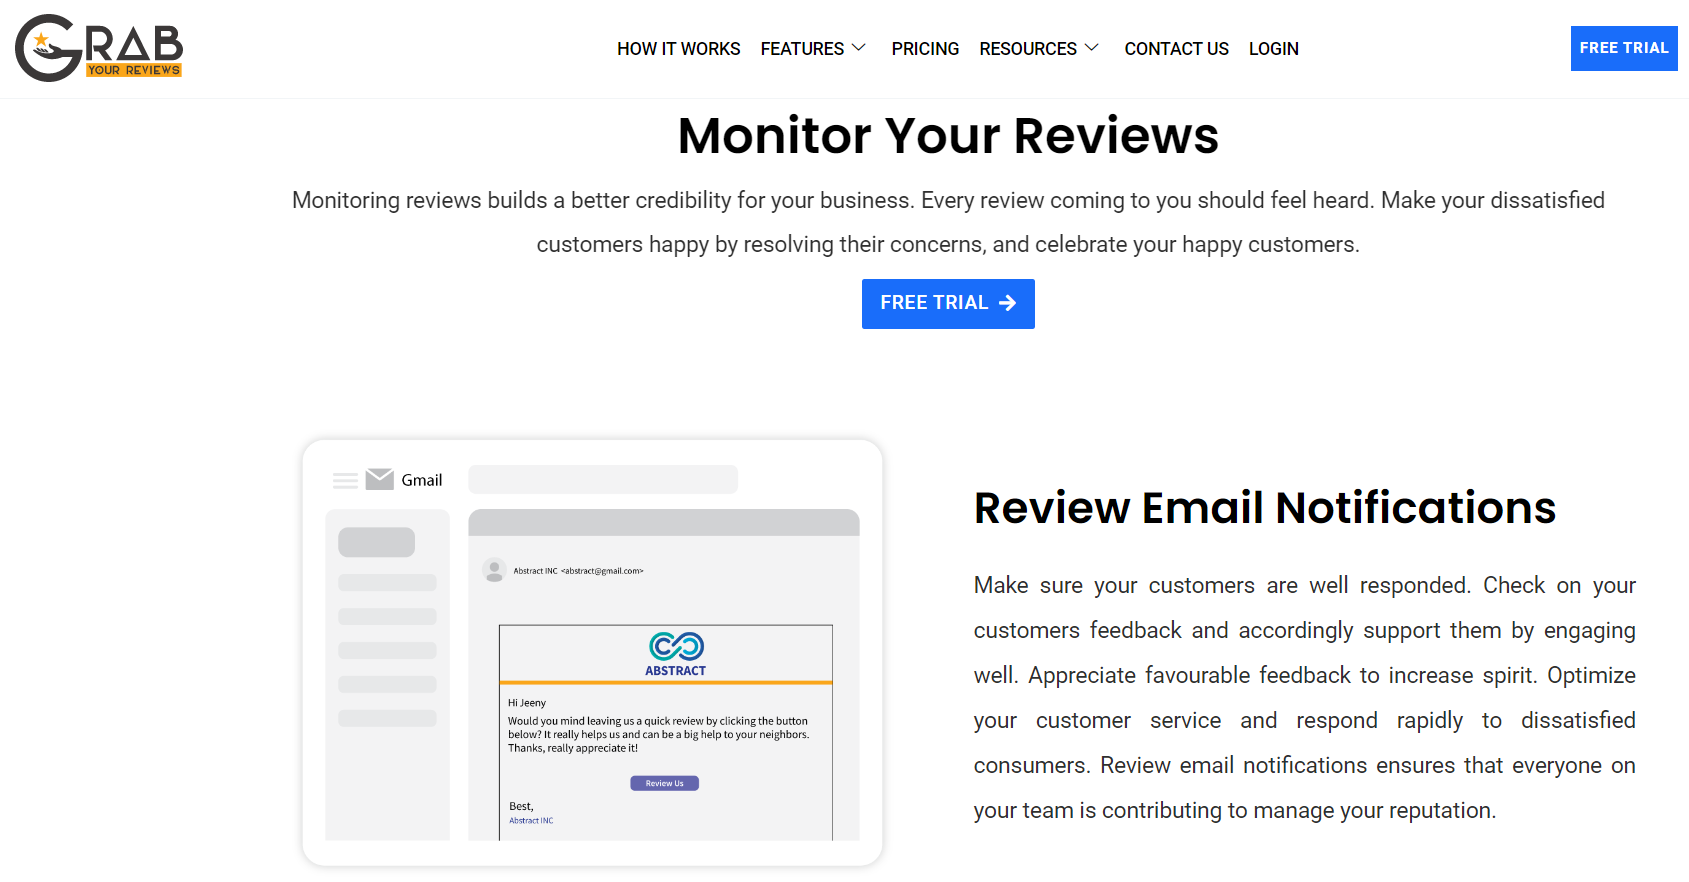 Grab Your Reviews features